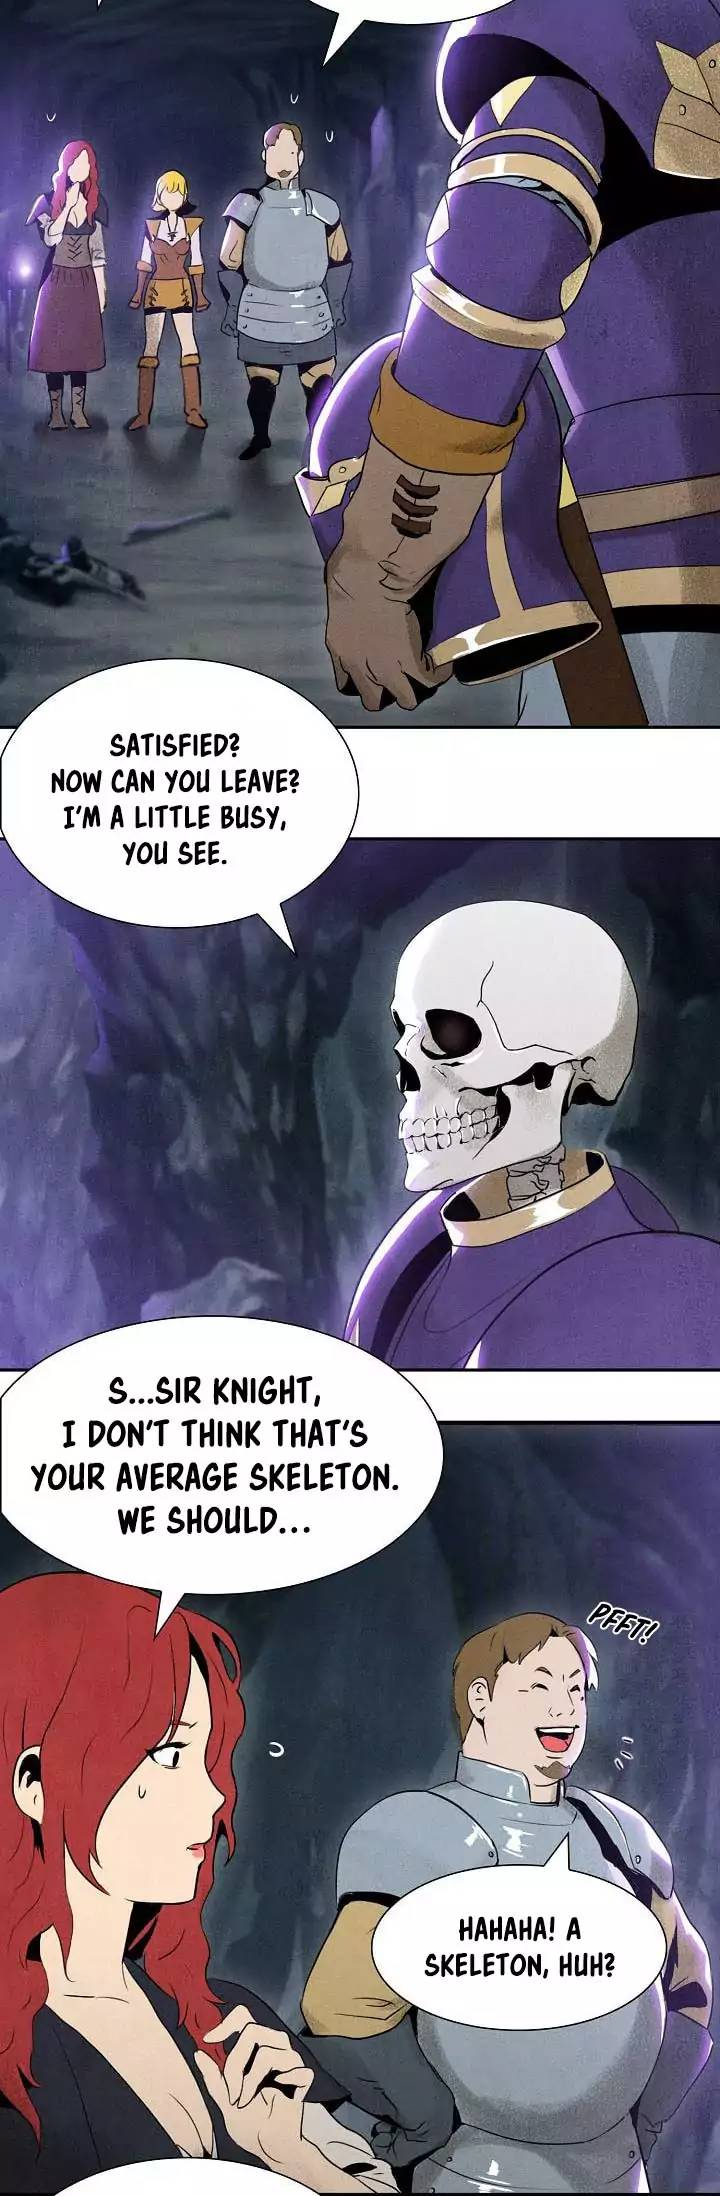 Skeleton Soldier Couldnt Protect The Dungeon 6 22